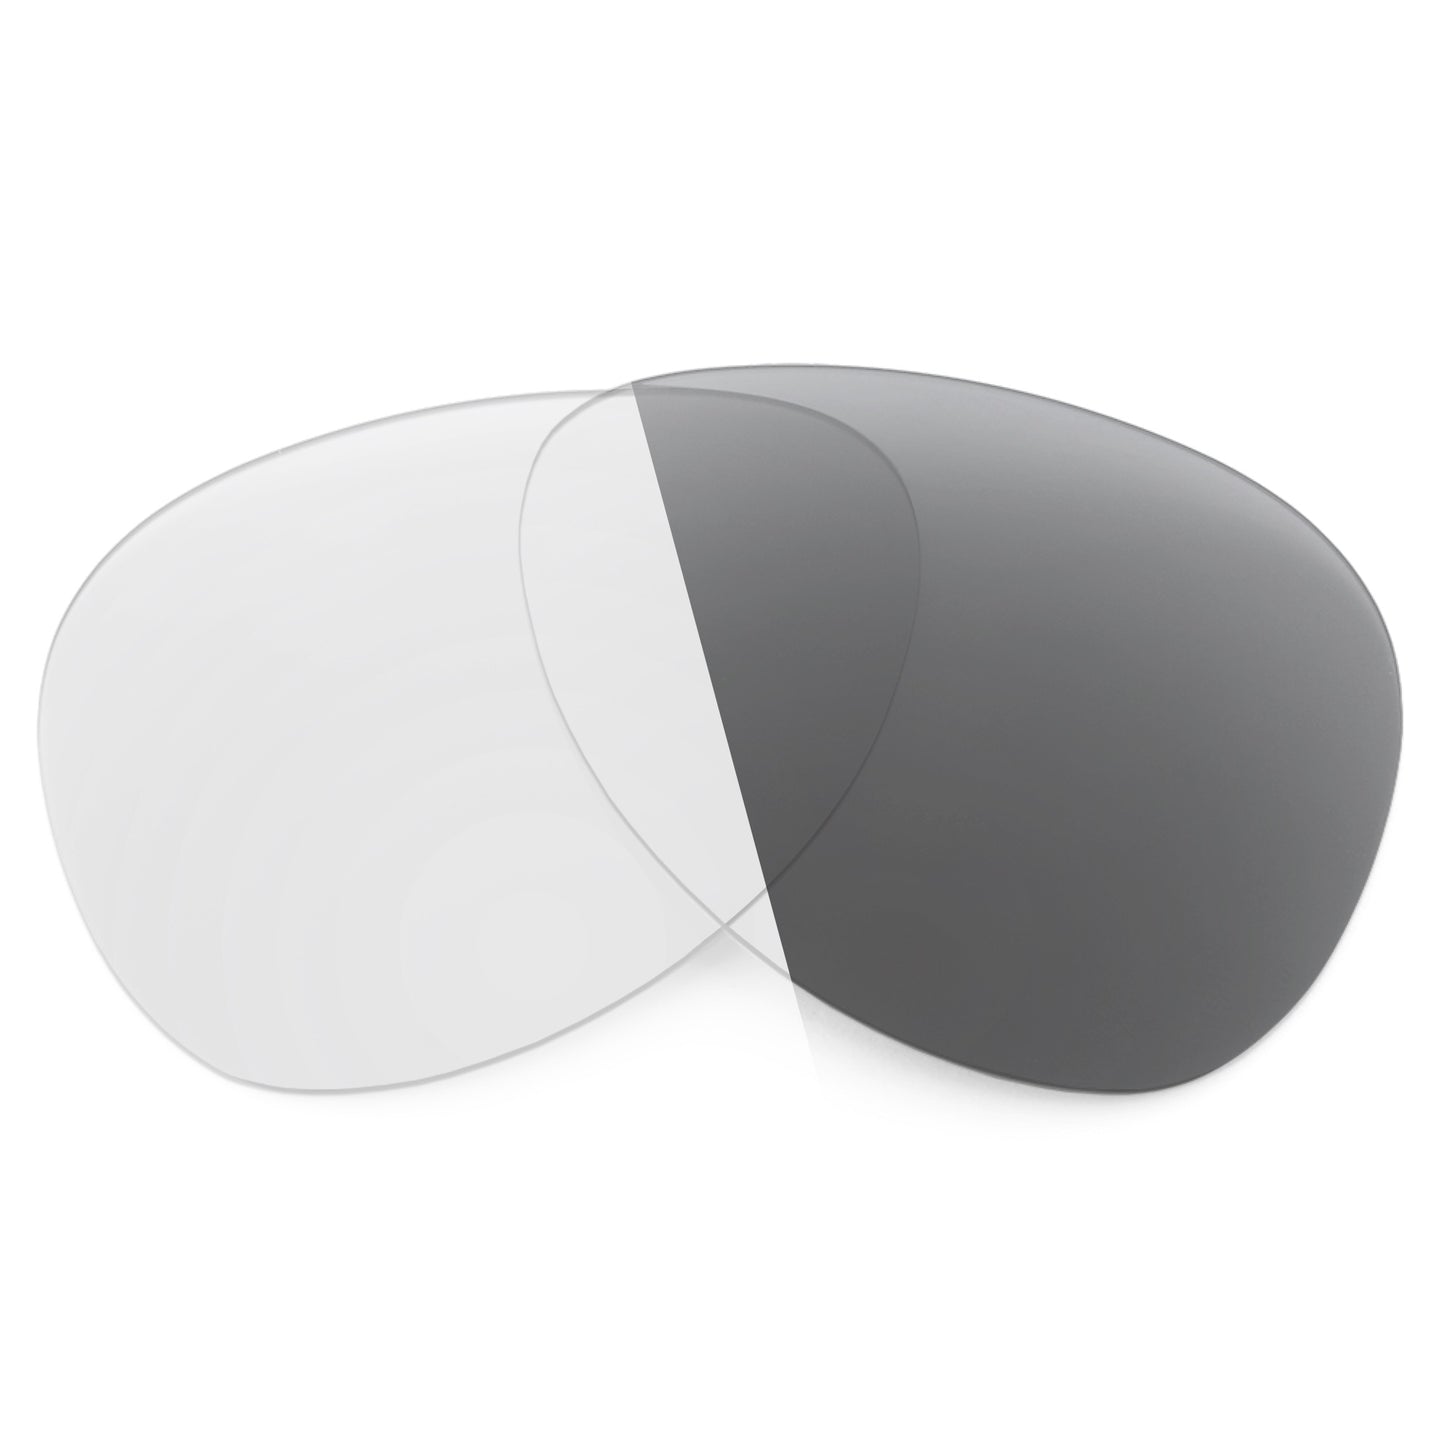 Revant replacement lenses for Oakley Given Non-Polarized Adapt Gray Photochromic